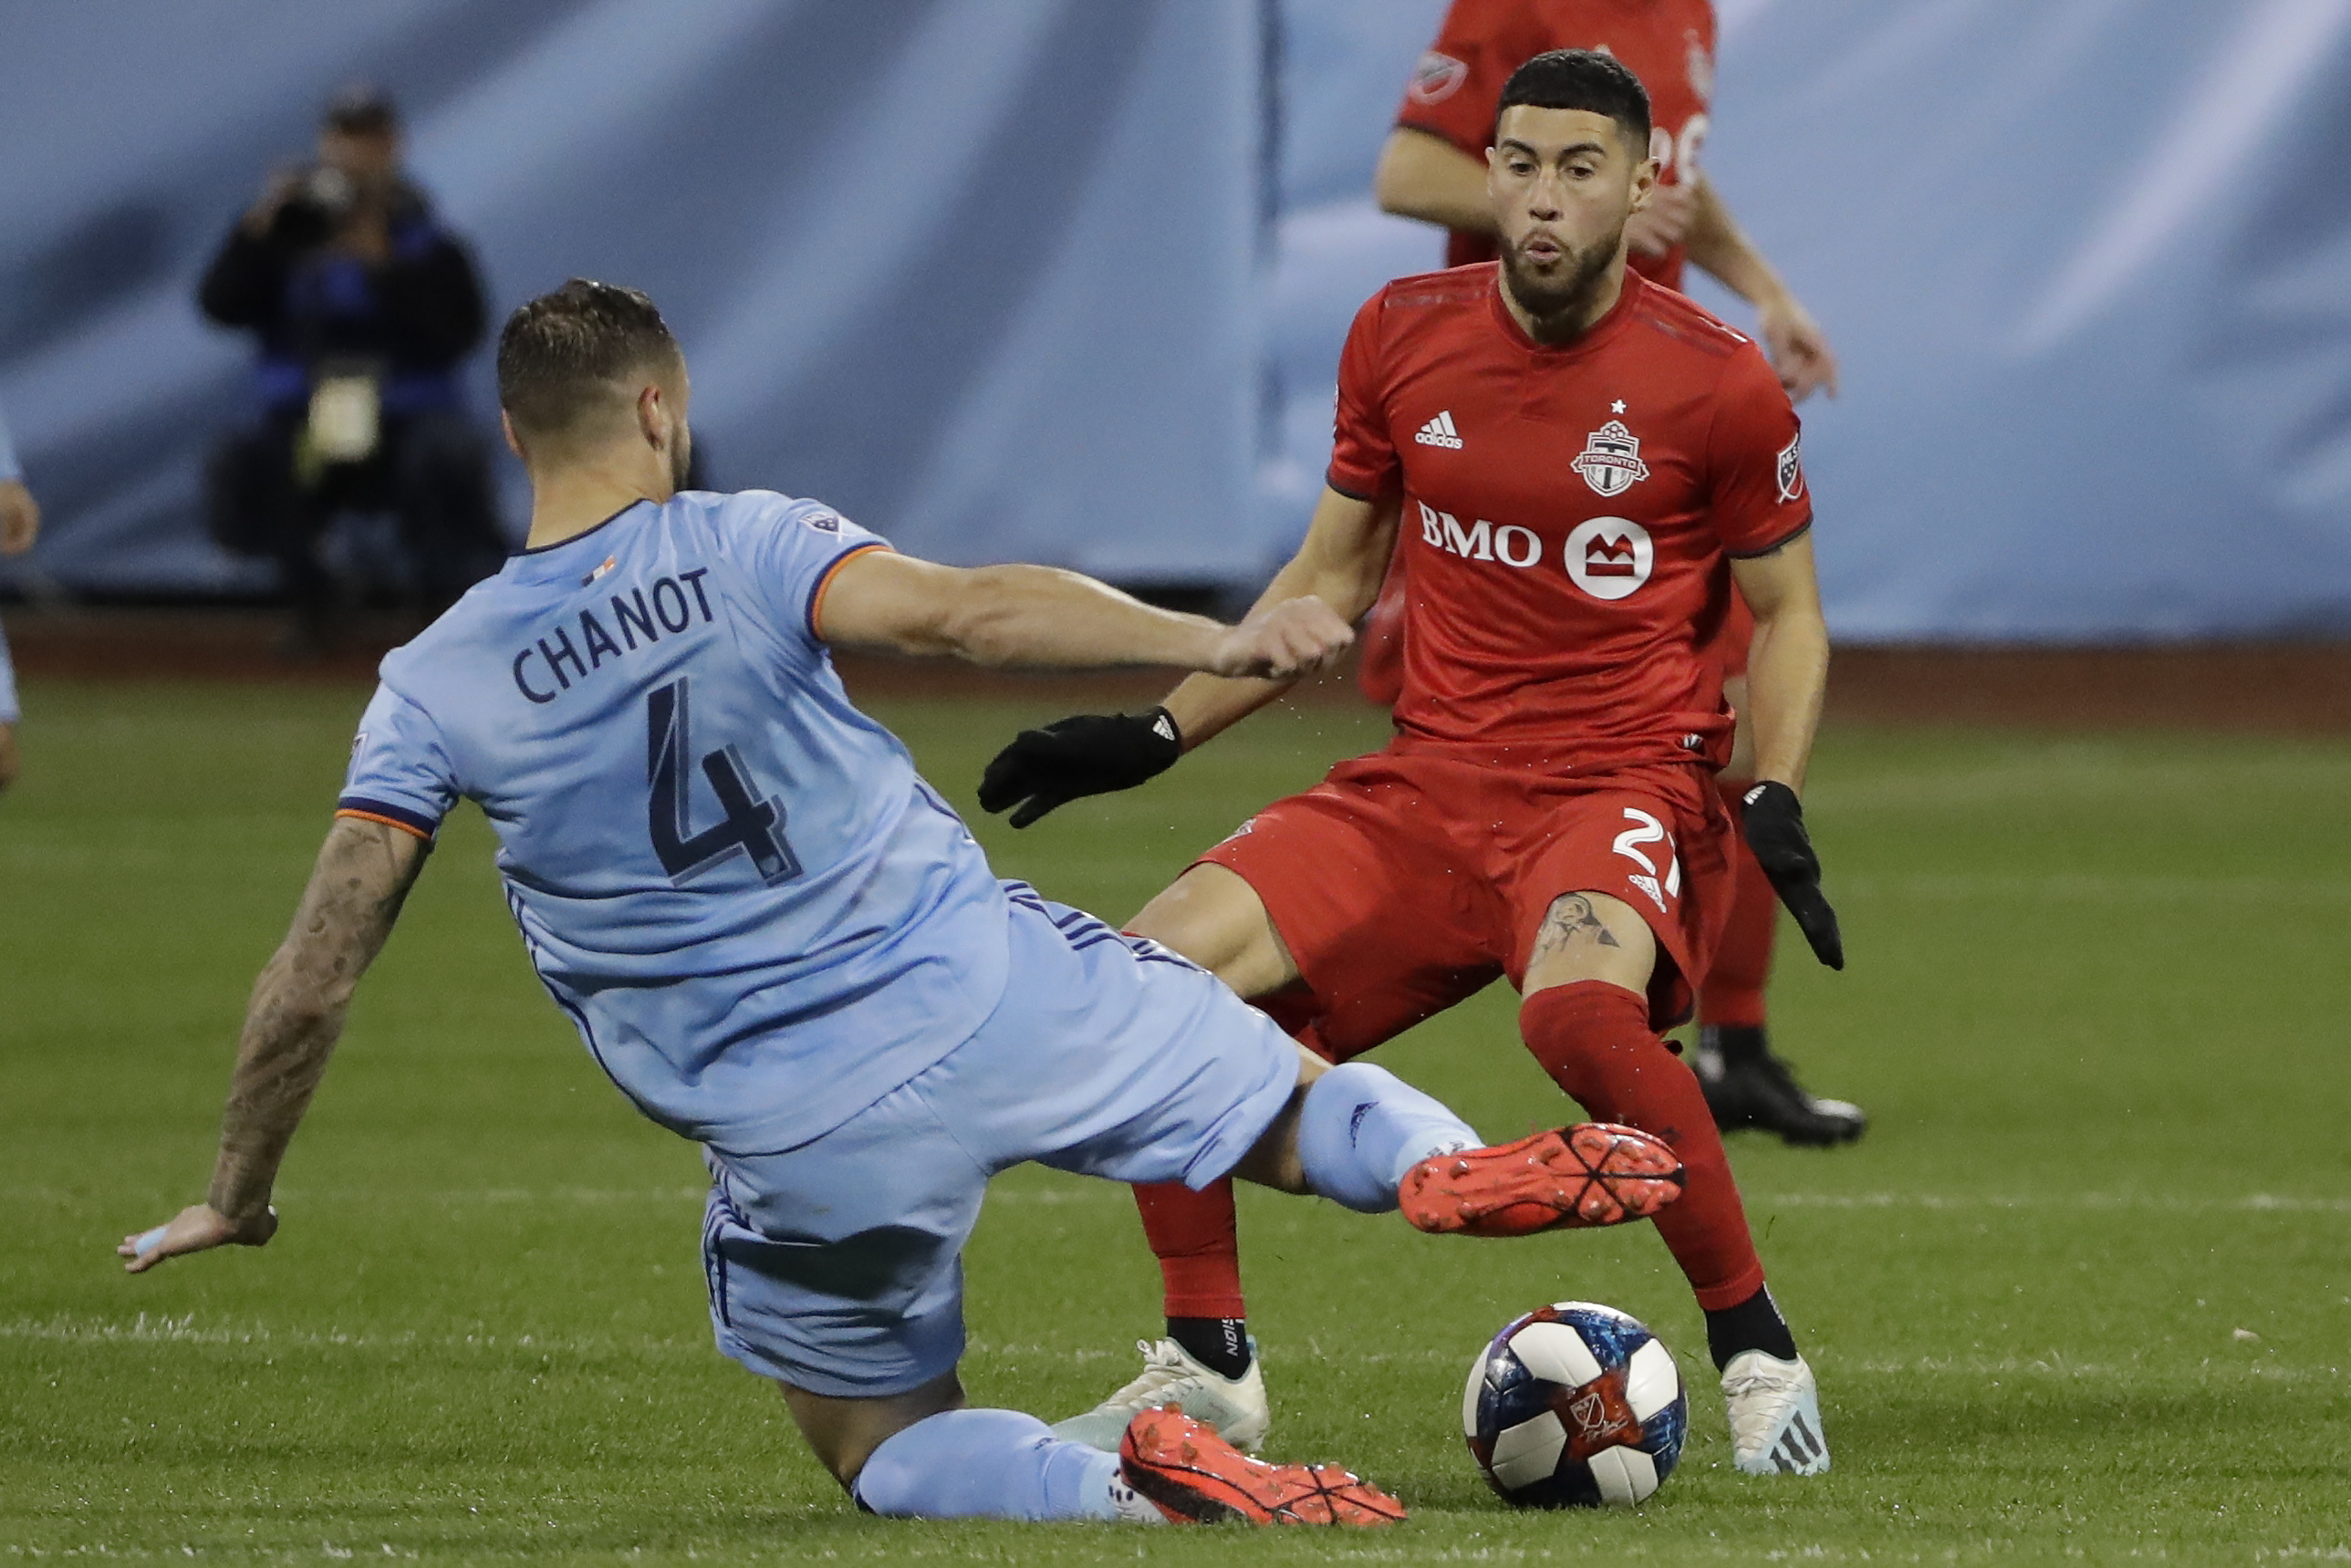 Toronto FC beats NYCFC 2-1 to reach East semifinals